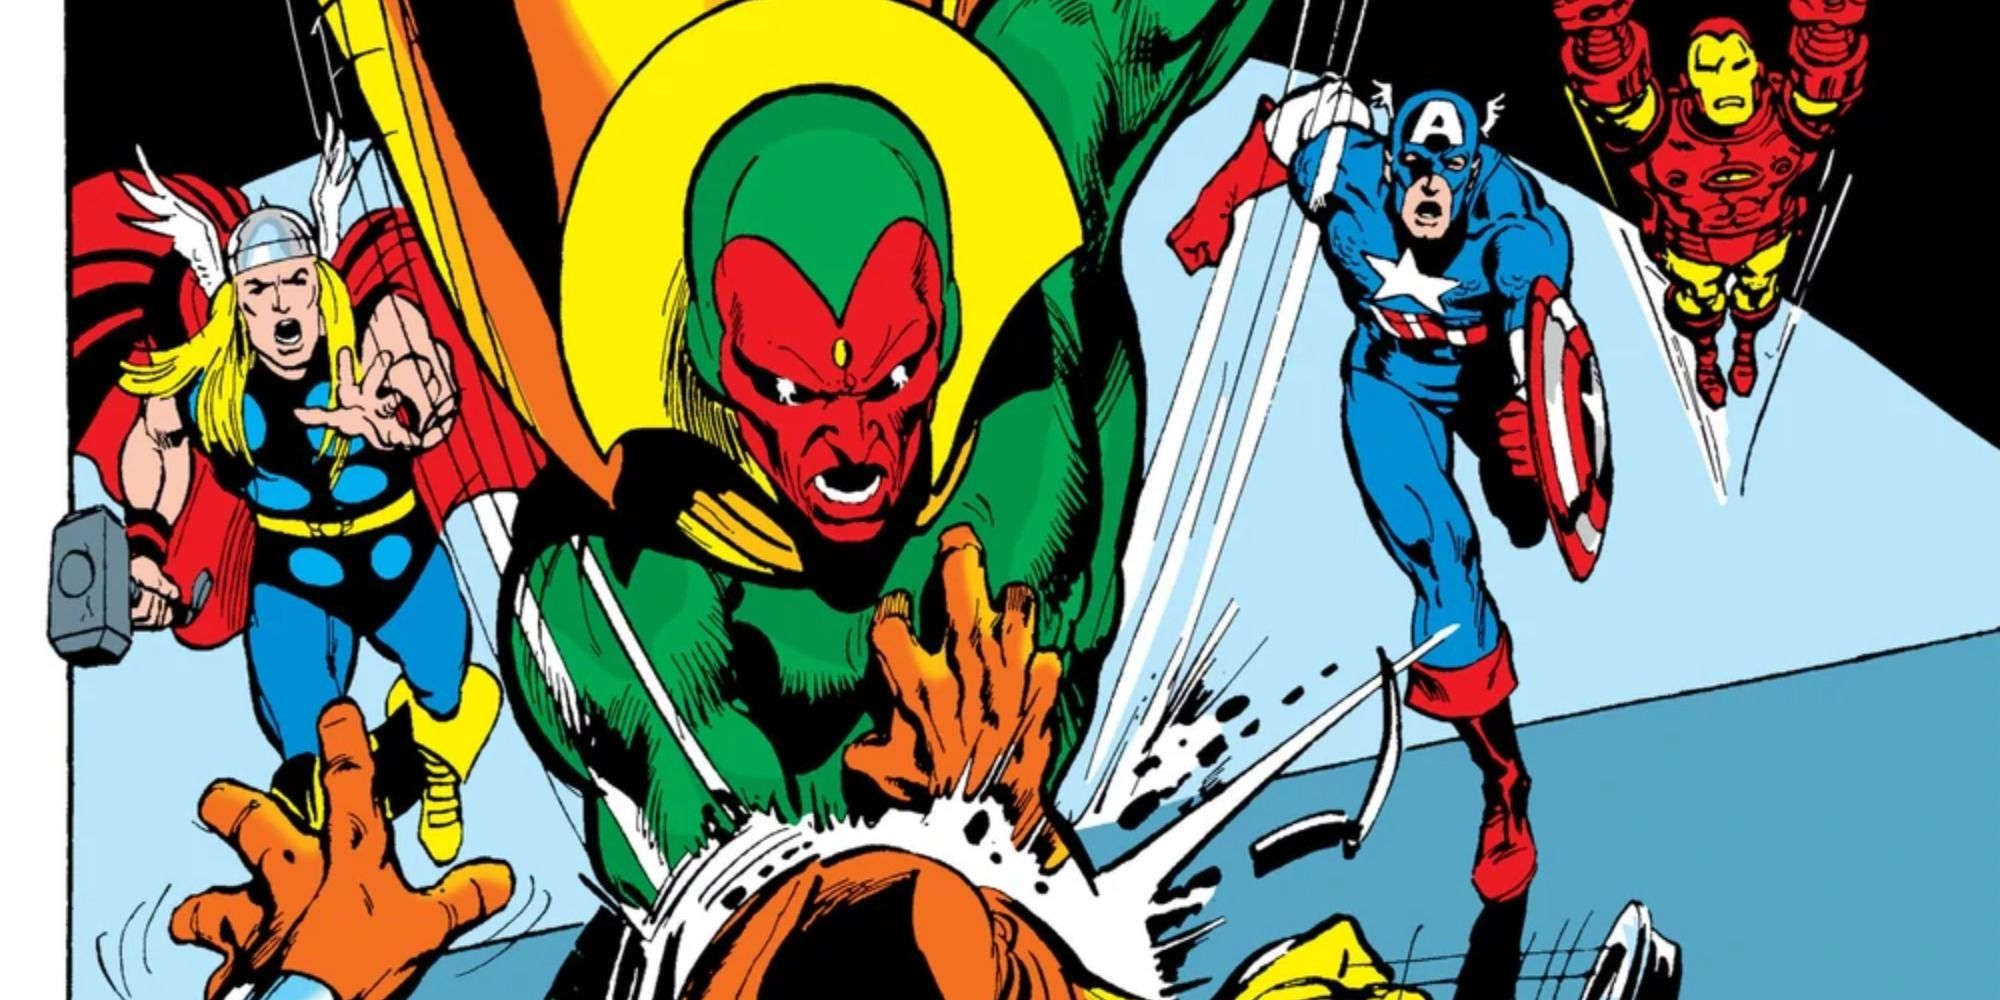 The Avengers try to stop Vision in Marvel Comics.